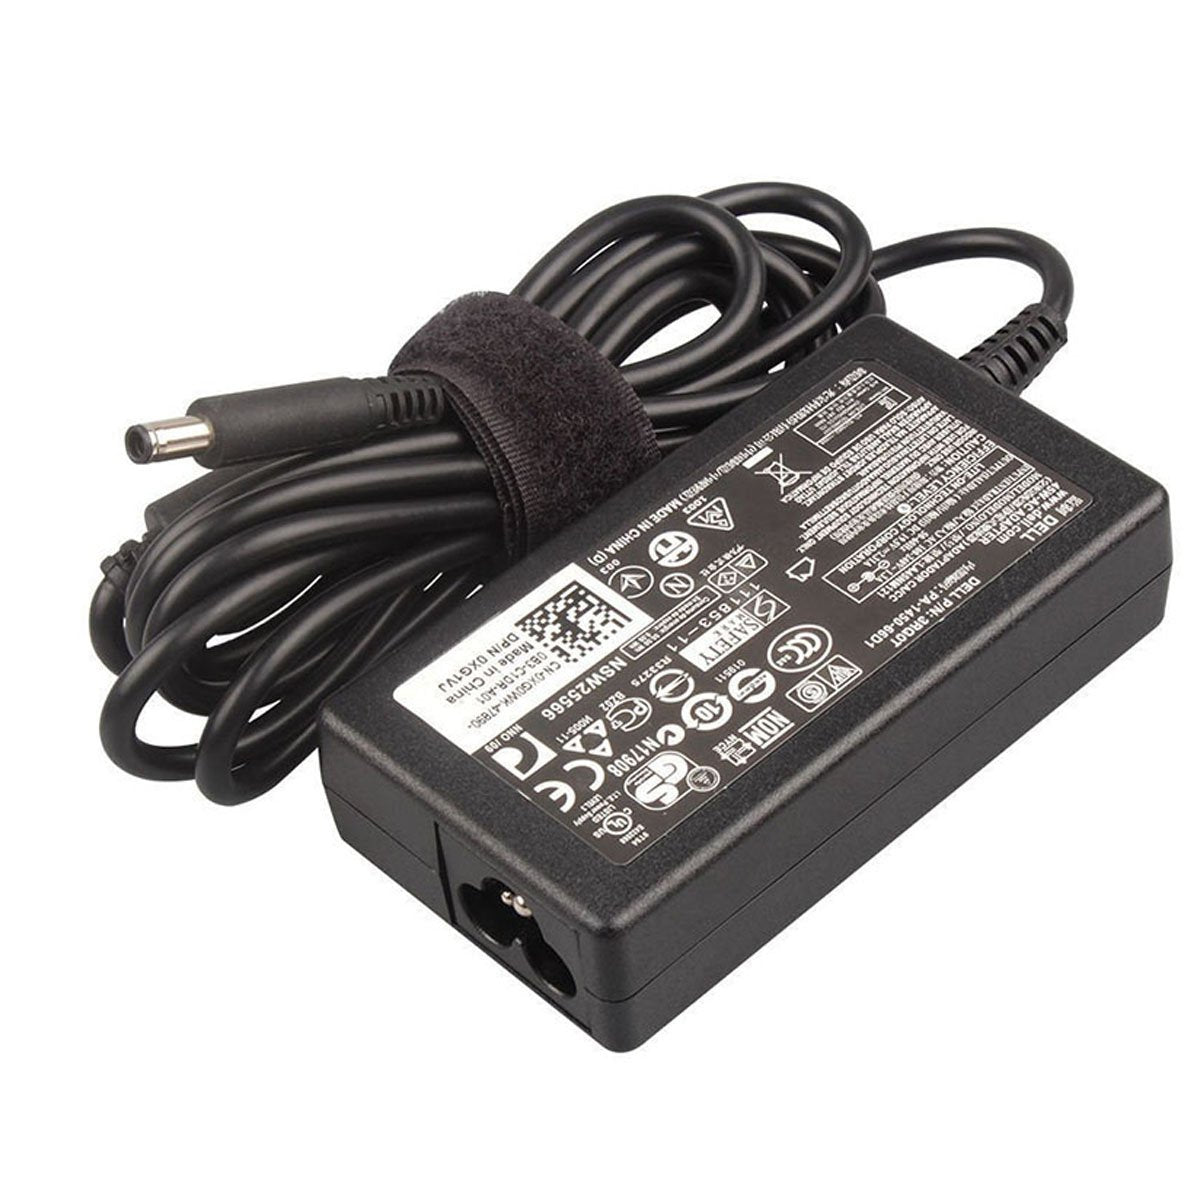 Dell Inspiron 17 5758 Original 45W Laptop Charger Adapter With Power Cord 19.5V 4.5mm Pin